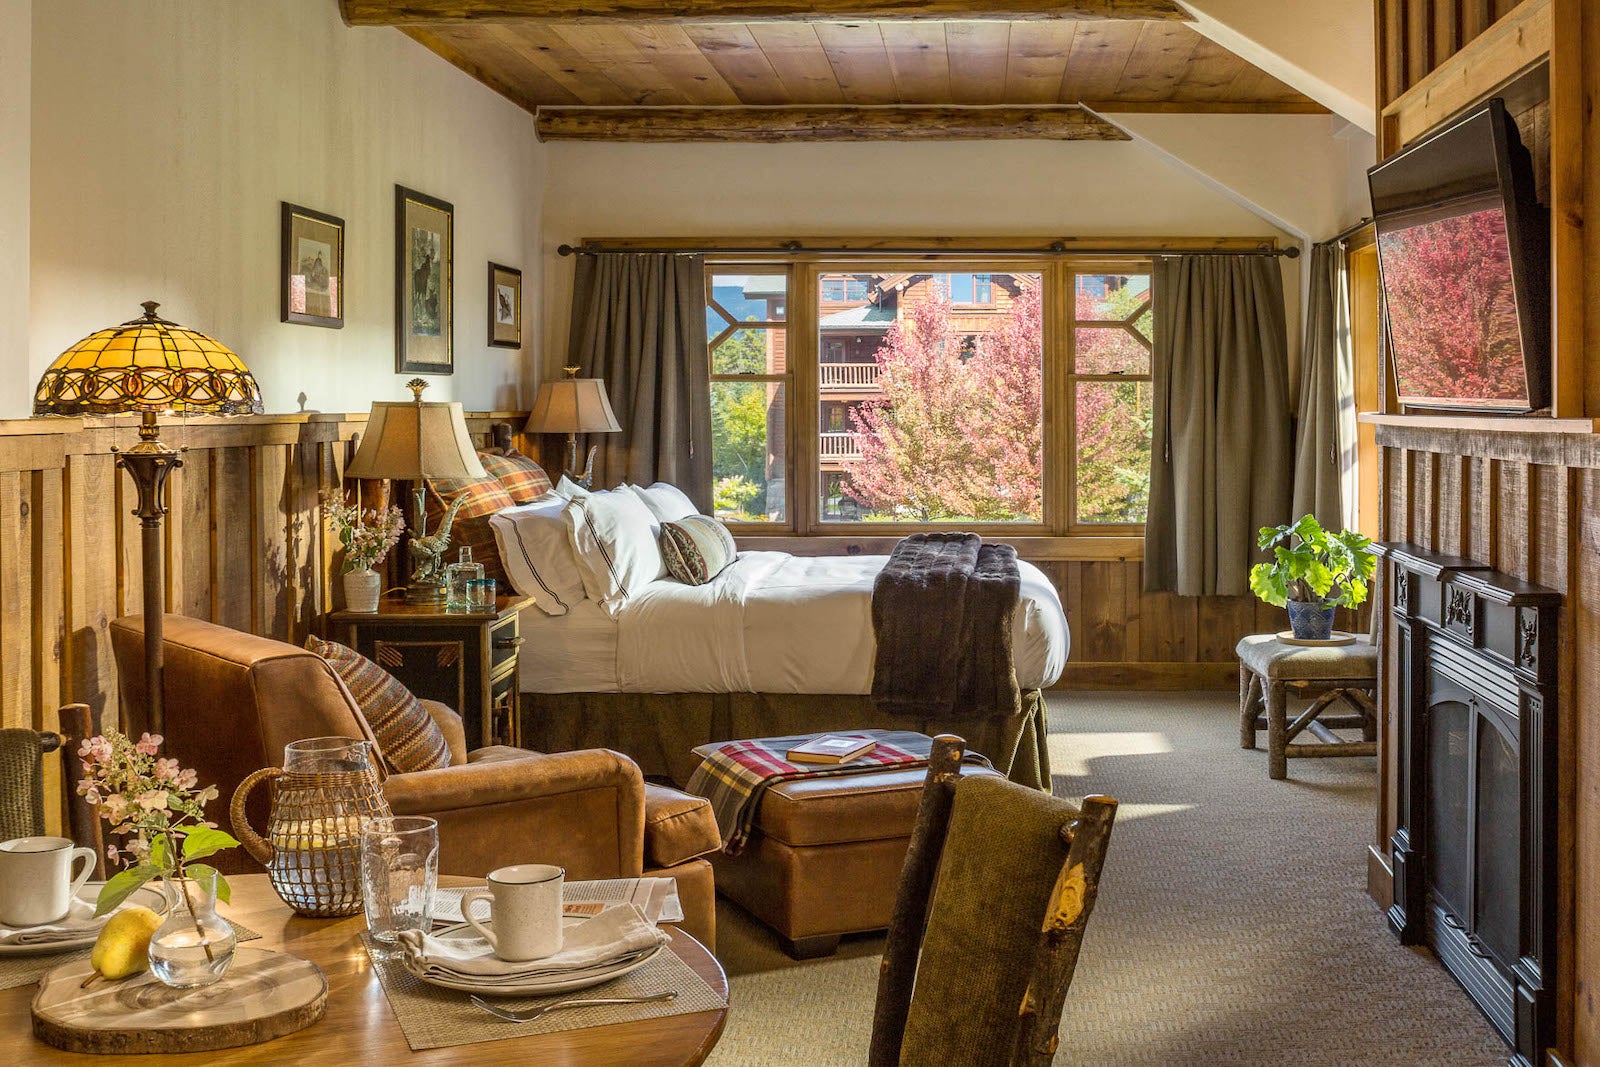 Lodge bedroom with fall trees outside window